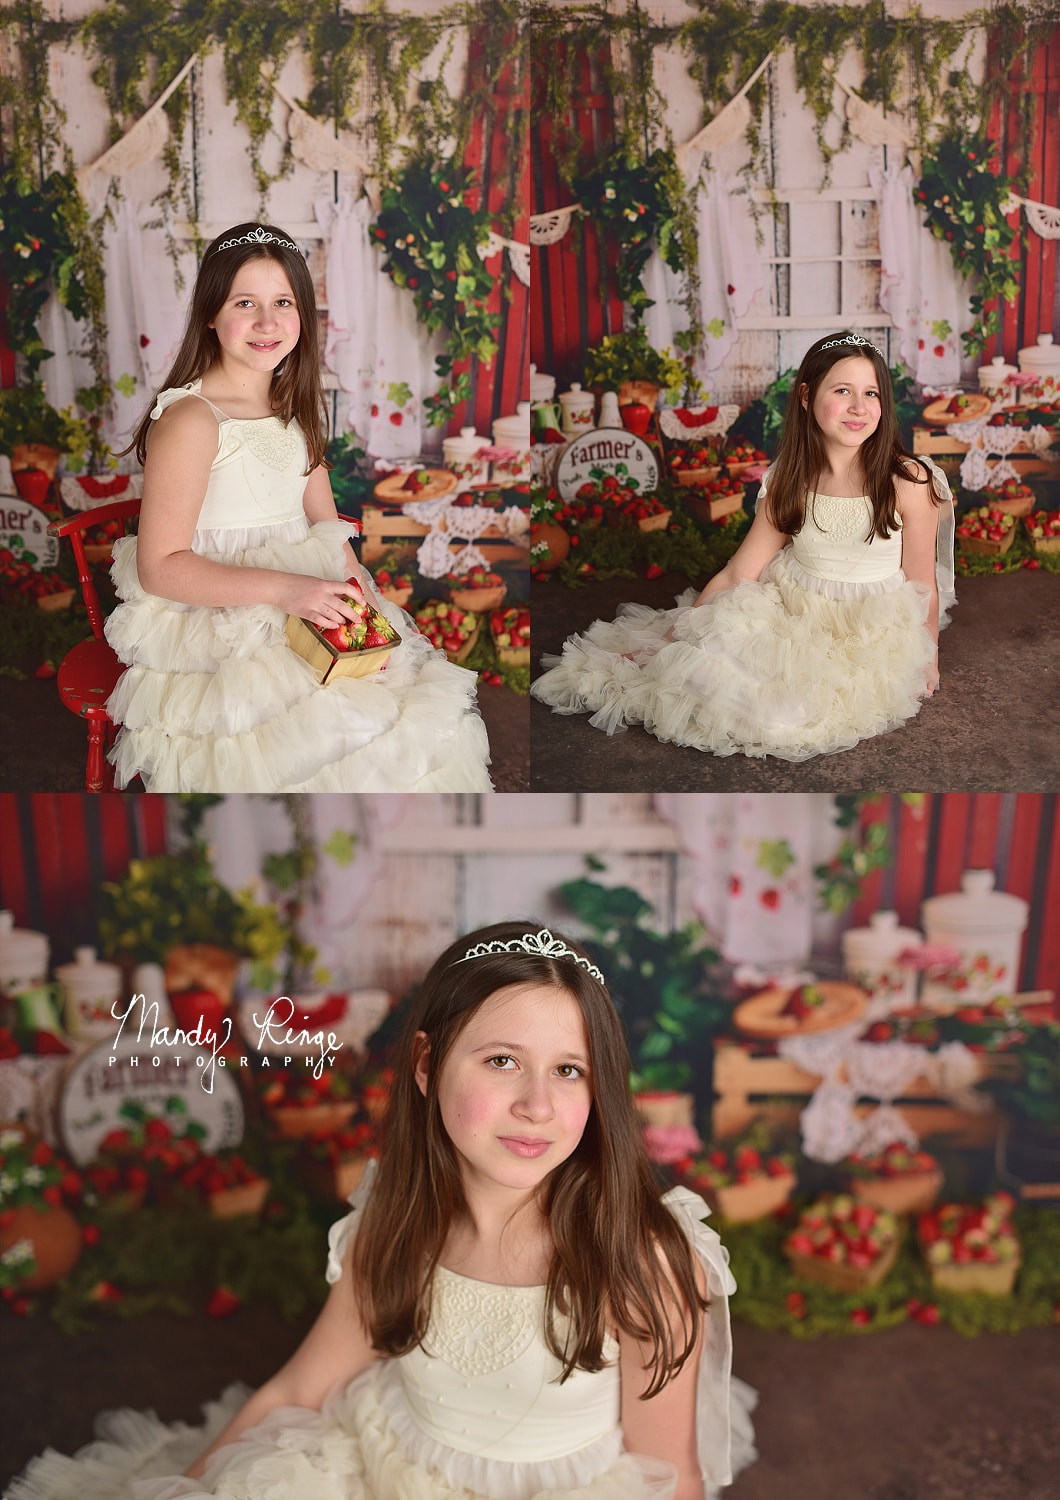 Sisters milestone portraits // strawberries, Dollcake dress, Baby Dream Backdrops // St Charles, IL Photographer // by Mandy Ringe Photography